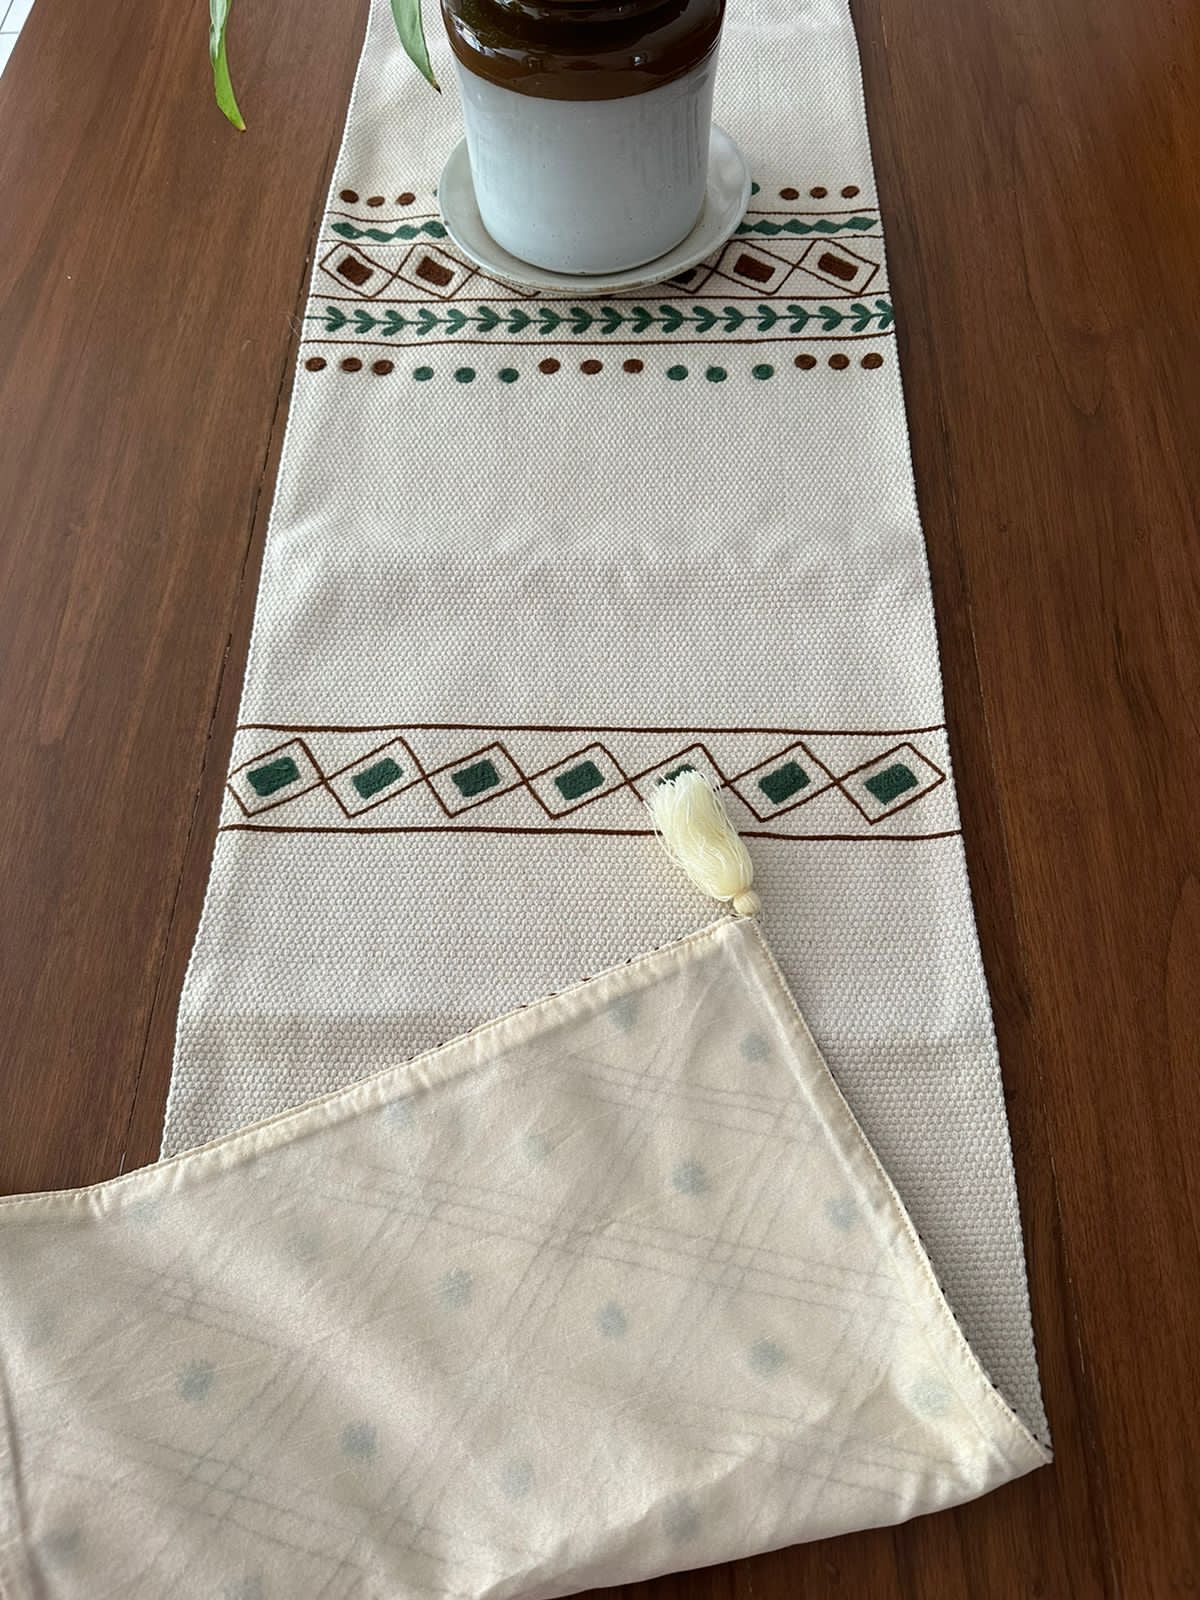 Embroidered Table Runner (70*14 inches)